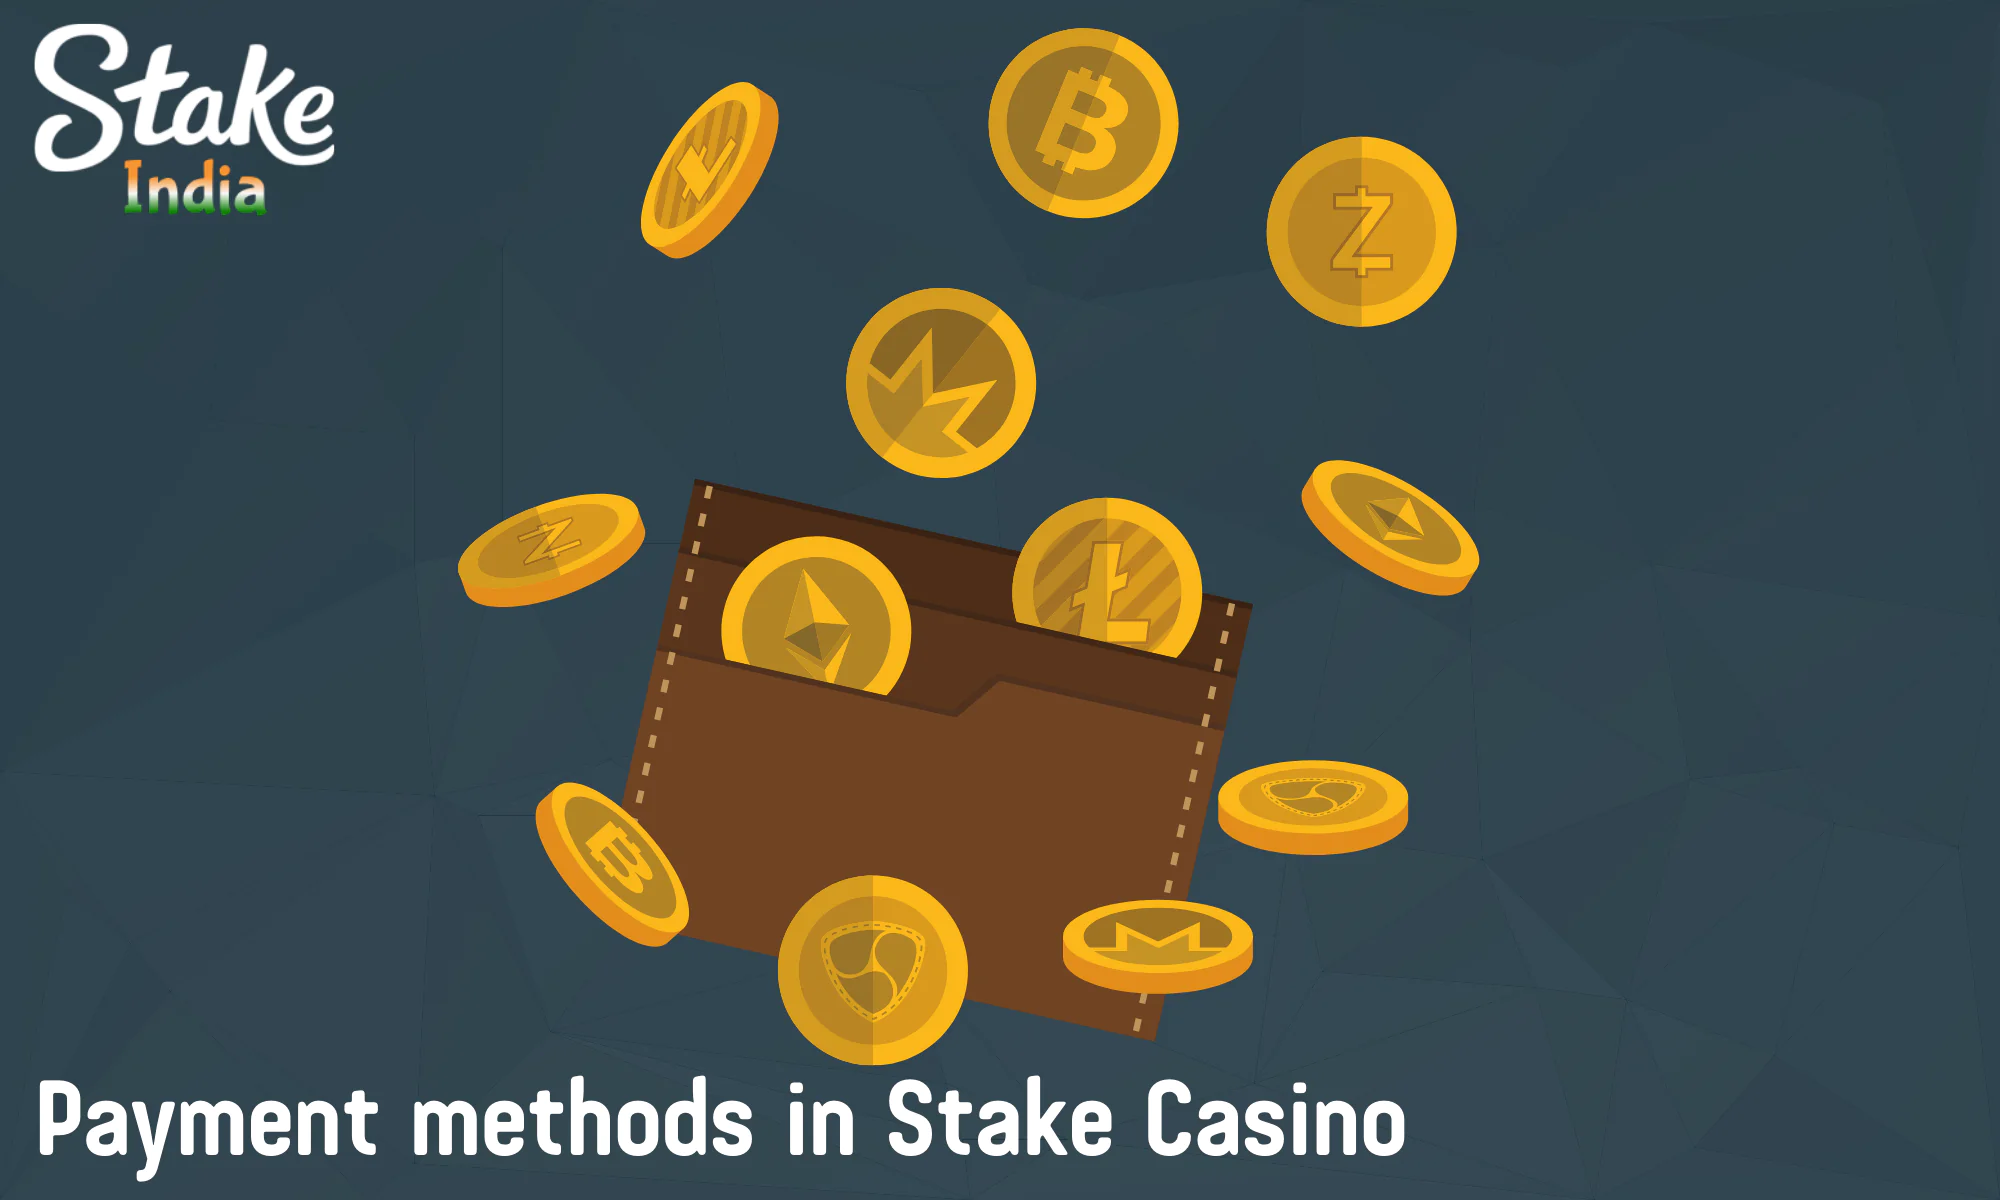 Some of the most popular payment methods at Stake Casino